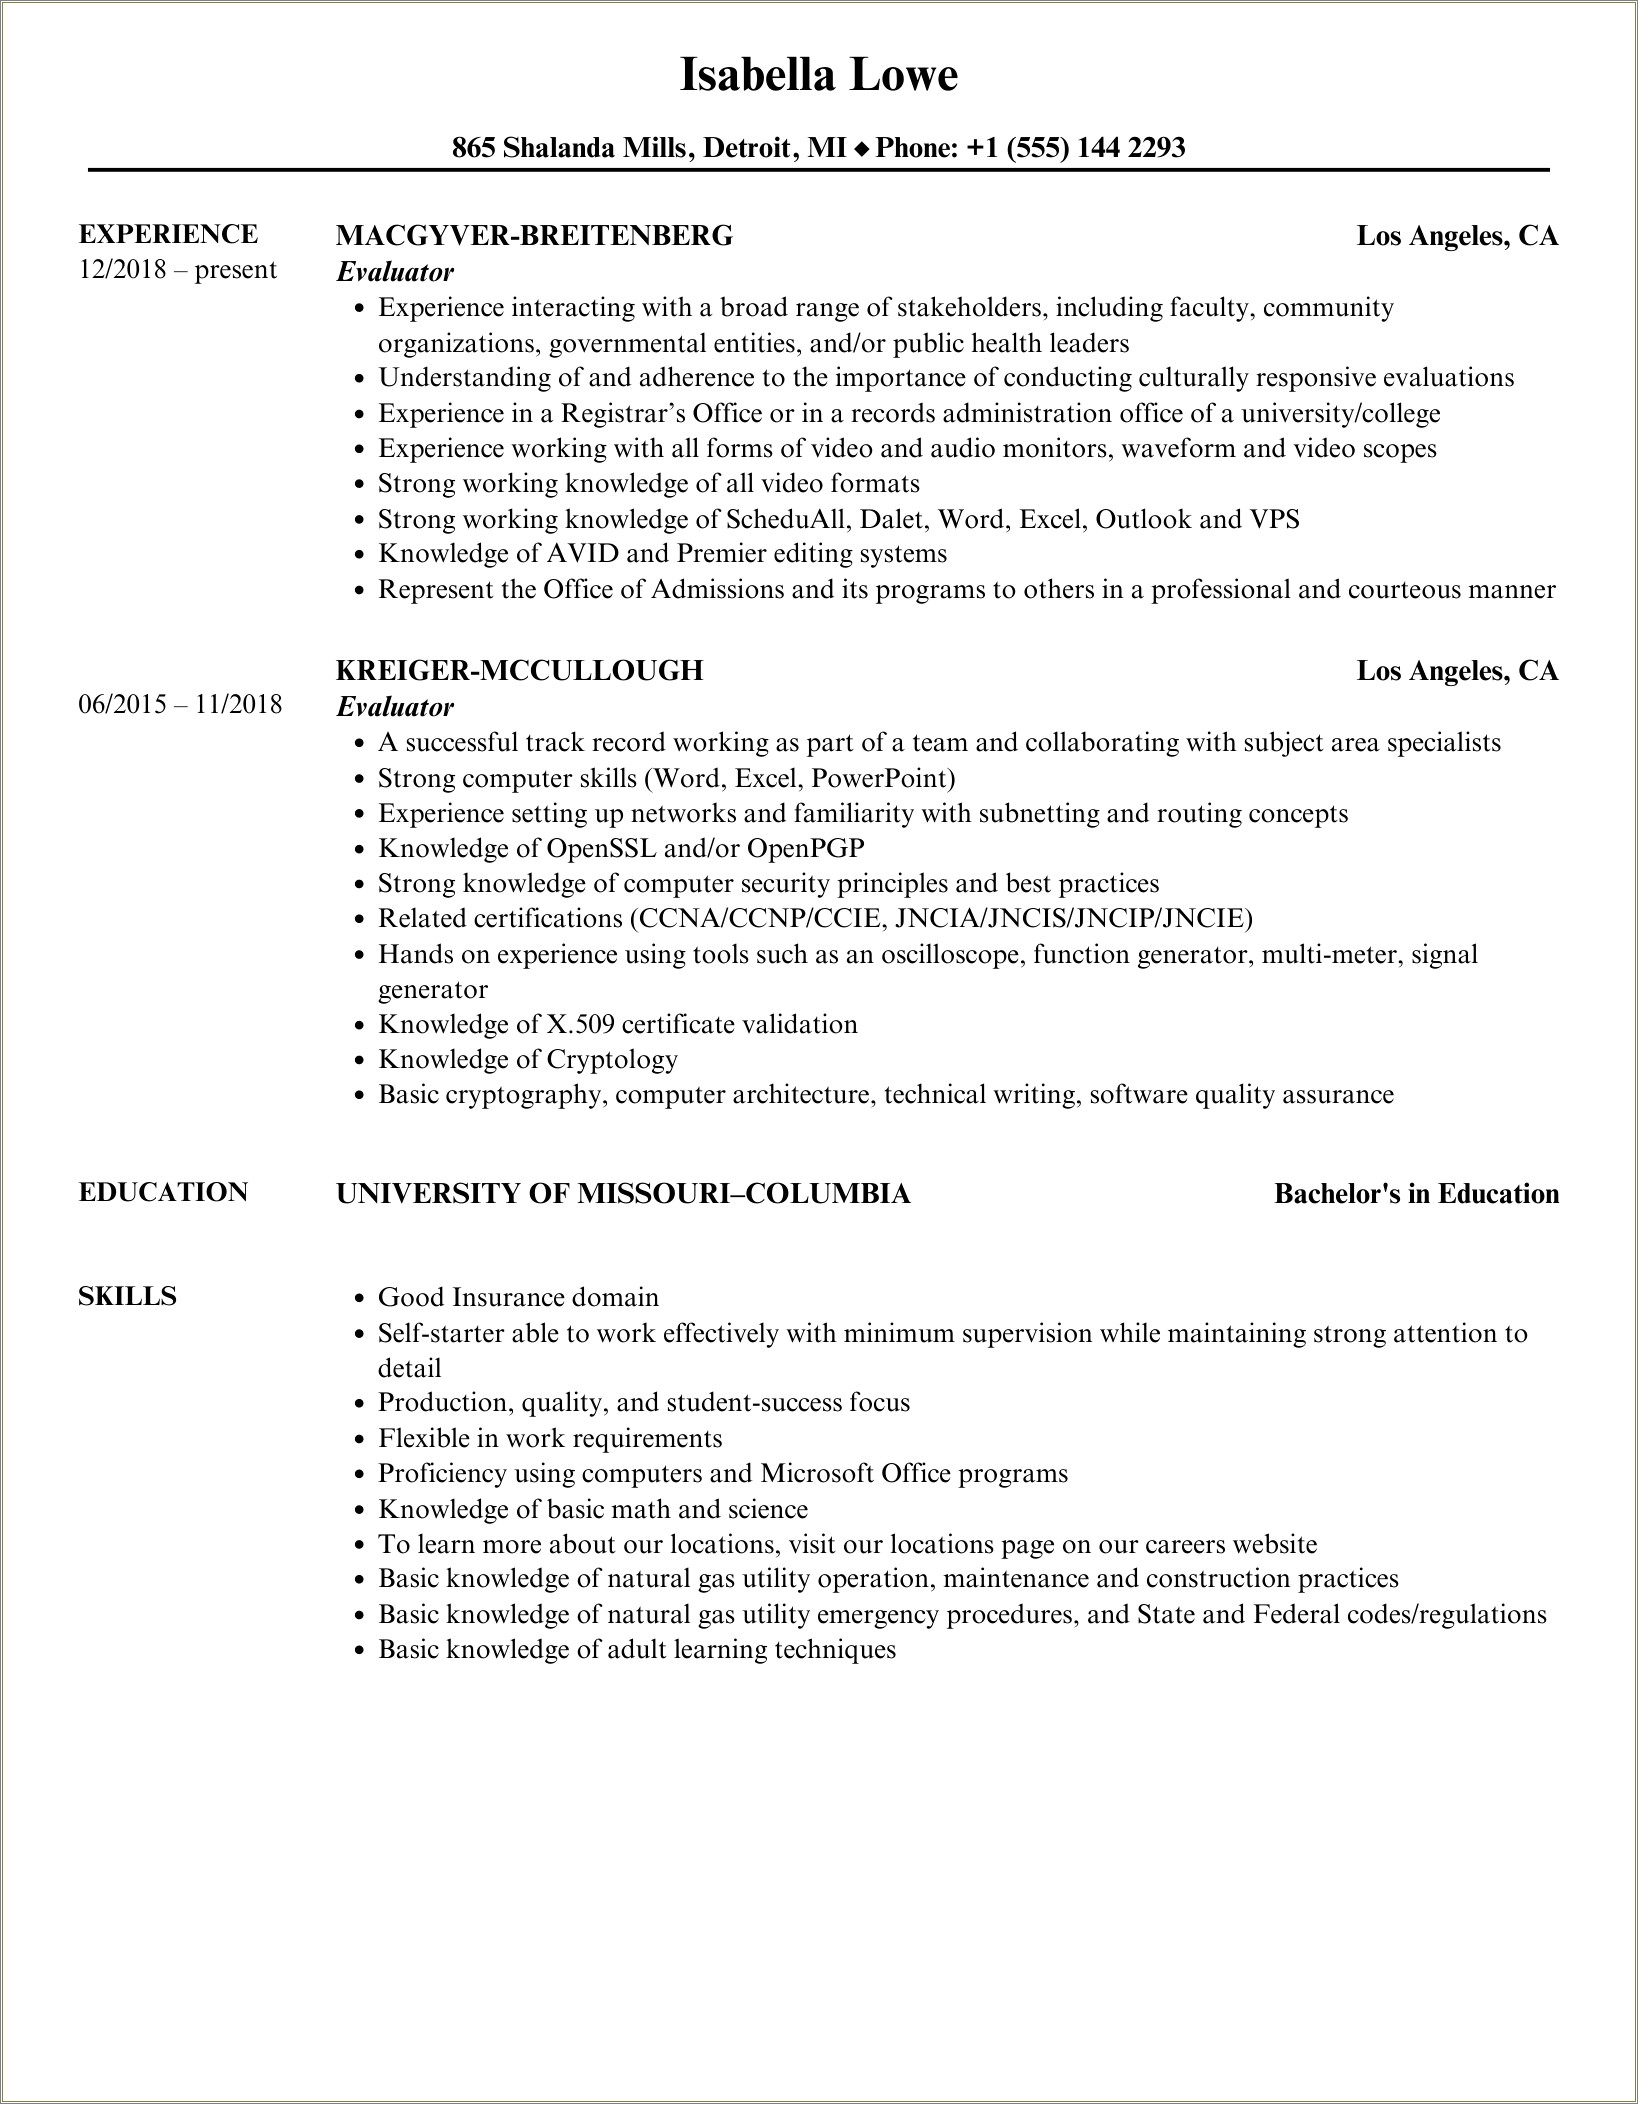 Sample Resume For Search Engine Evaluator